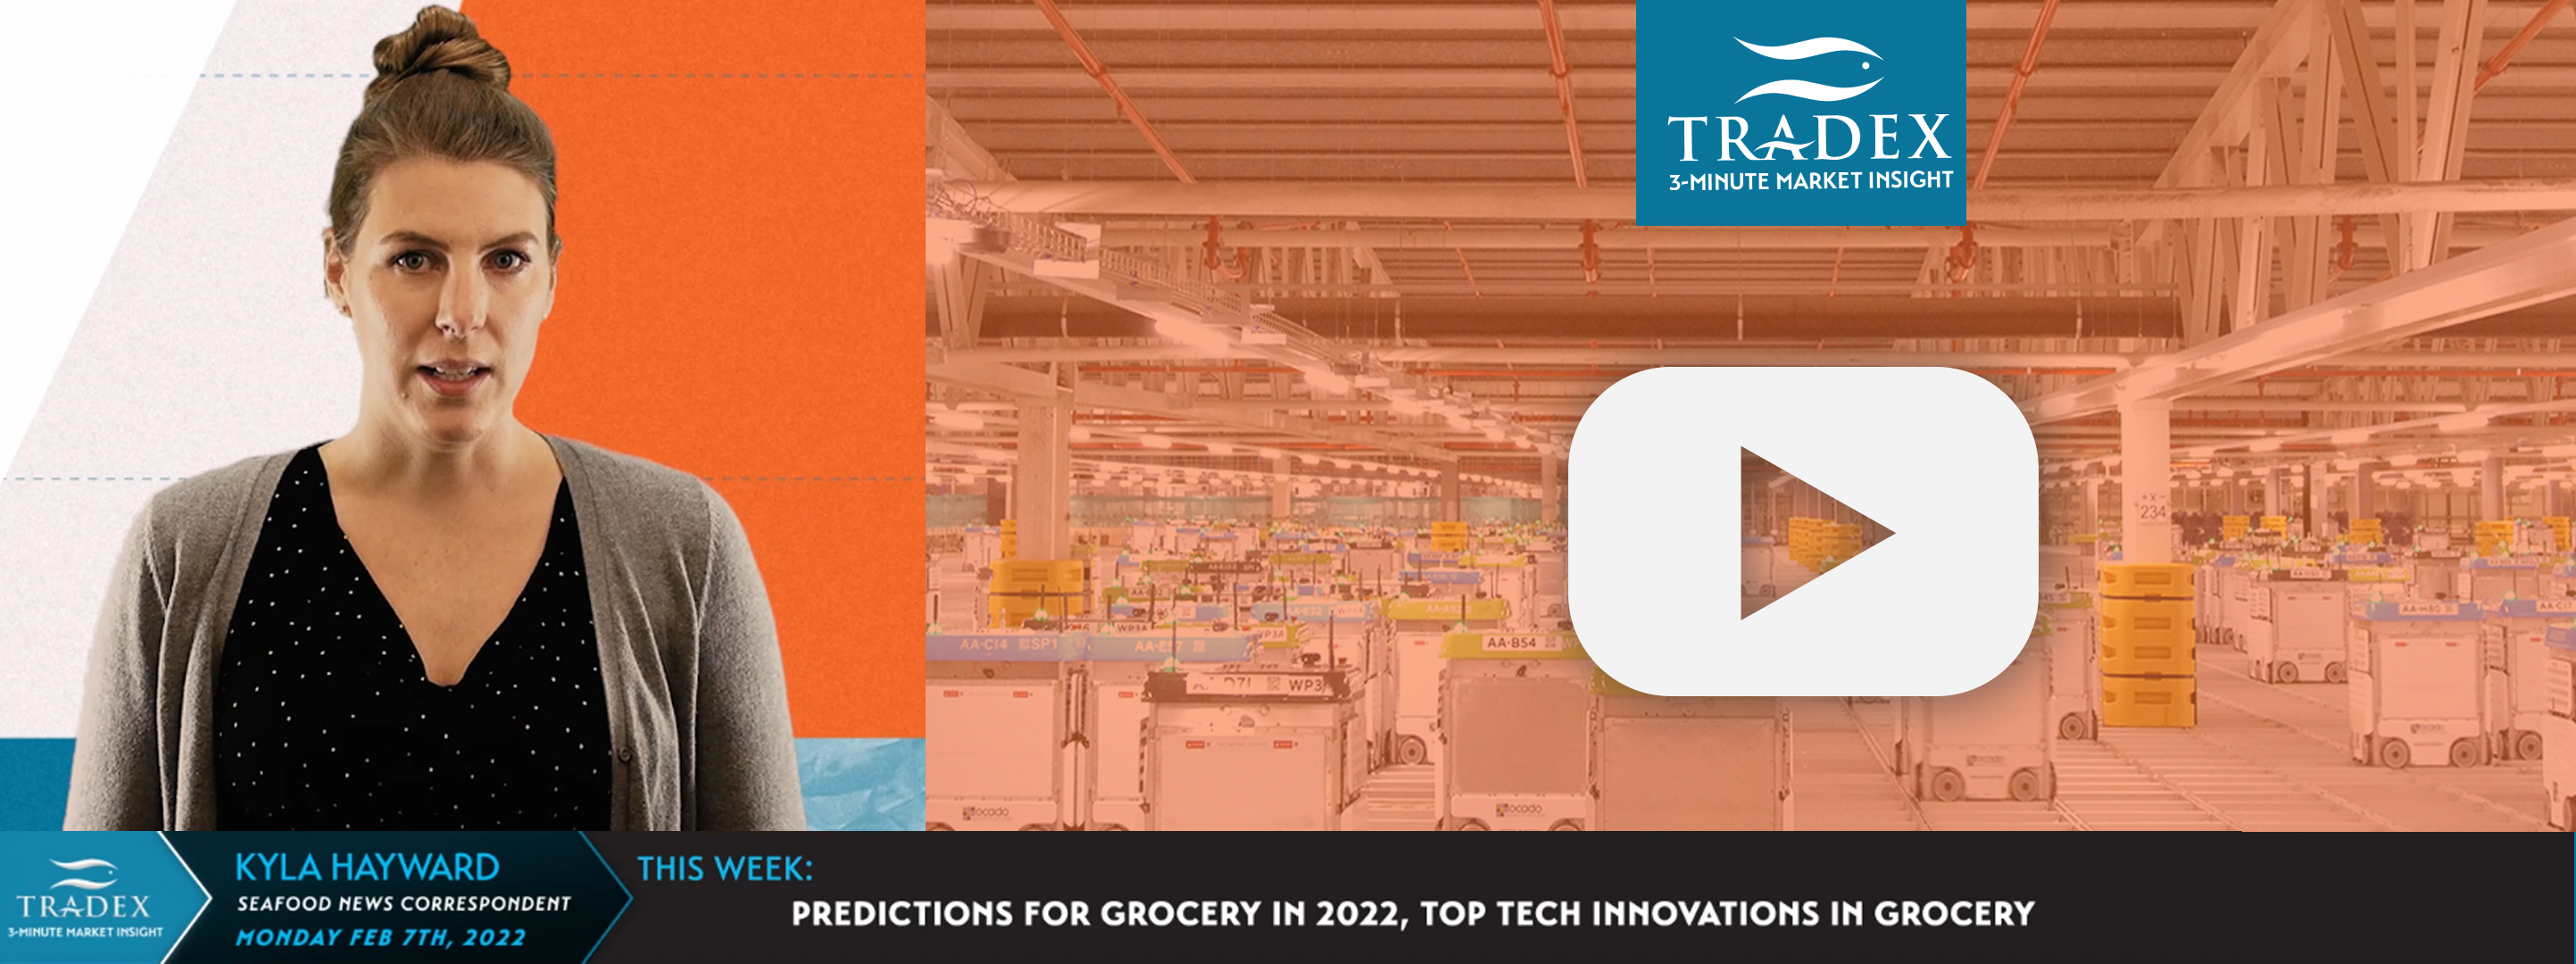 FUTURISTIC PREDICTIONS FOR GROCERY STORES 2022